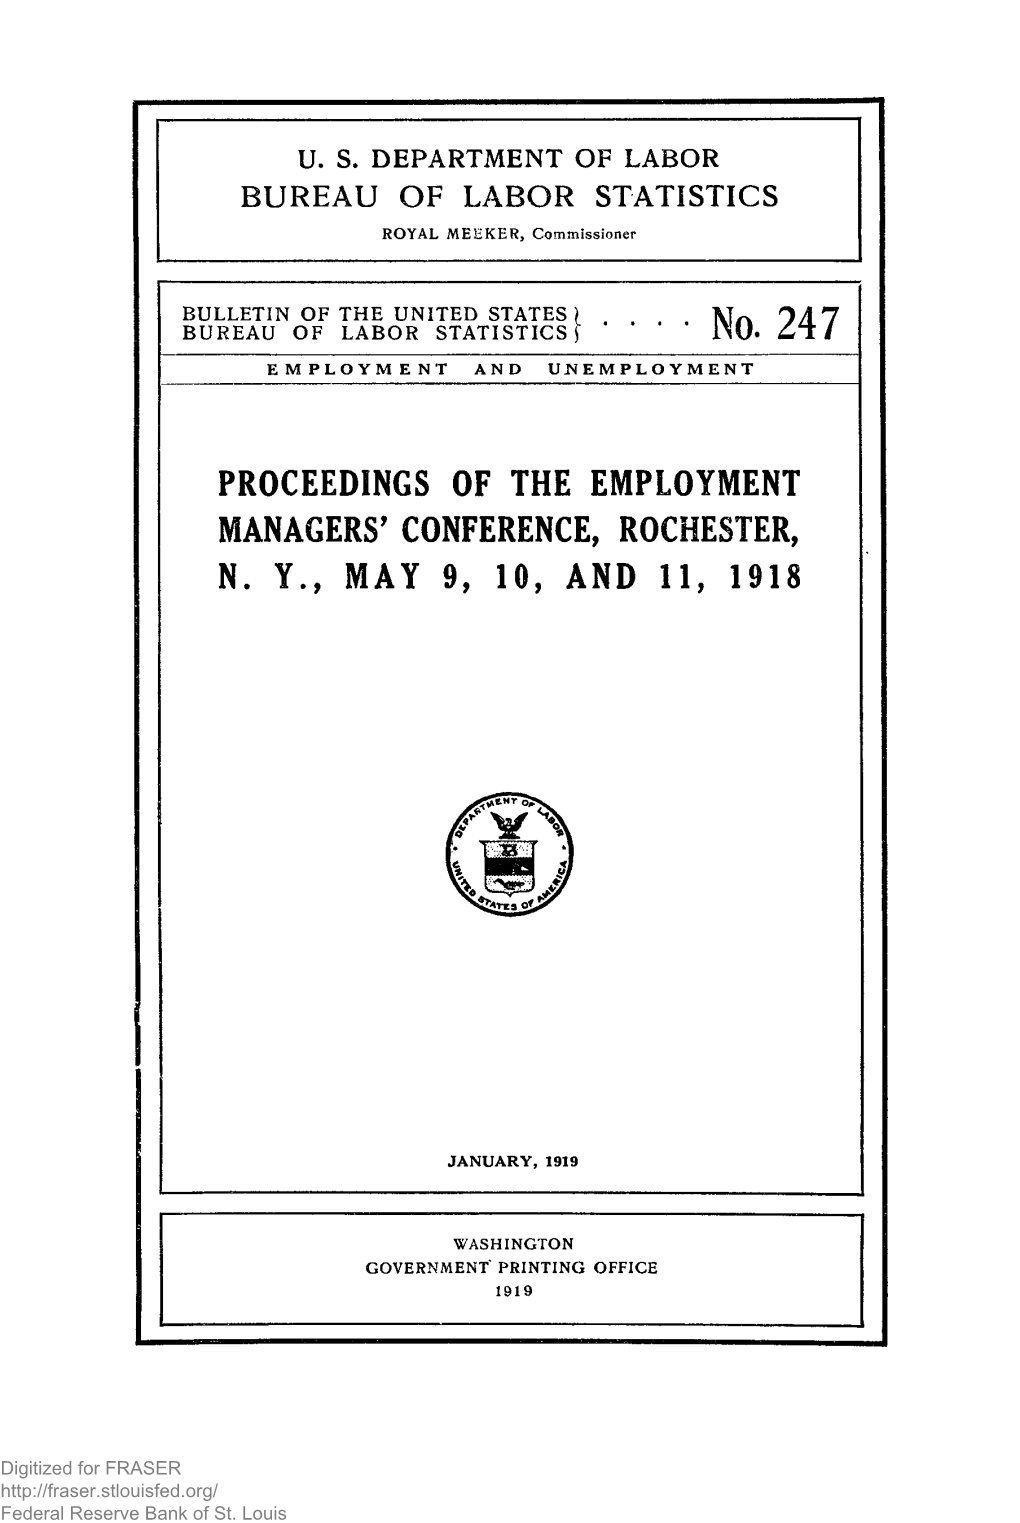 Proceedings of the Employment Managers' Conference, Rochester